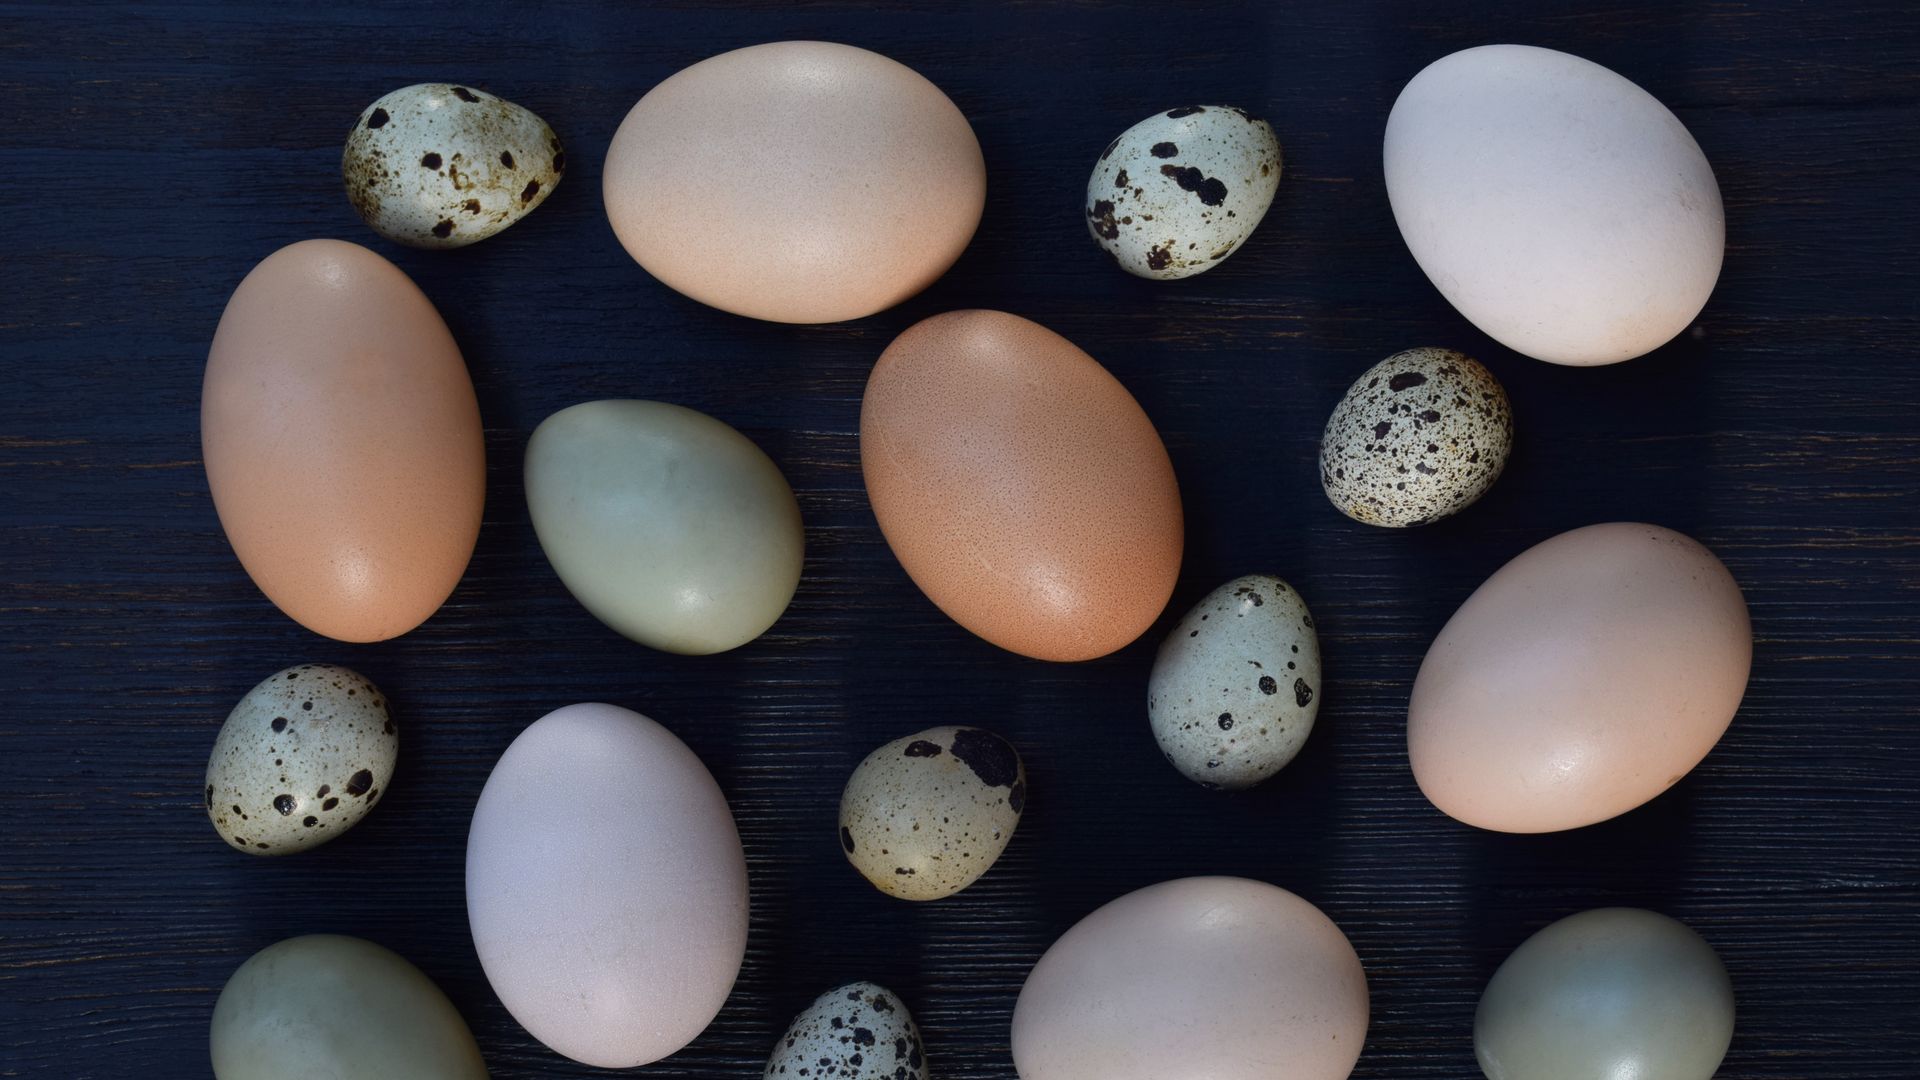 Several different bird eggs with varying colors and sizes placed on a dark background